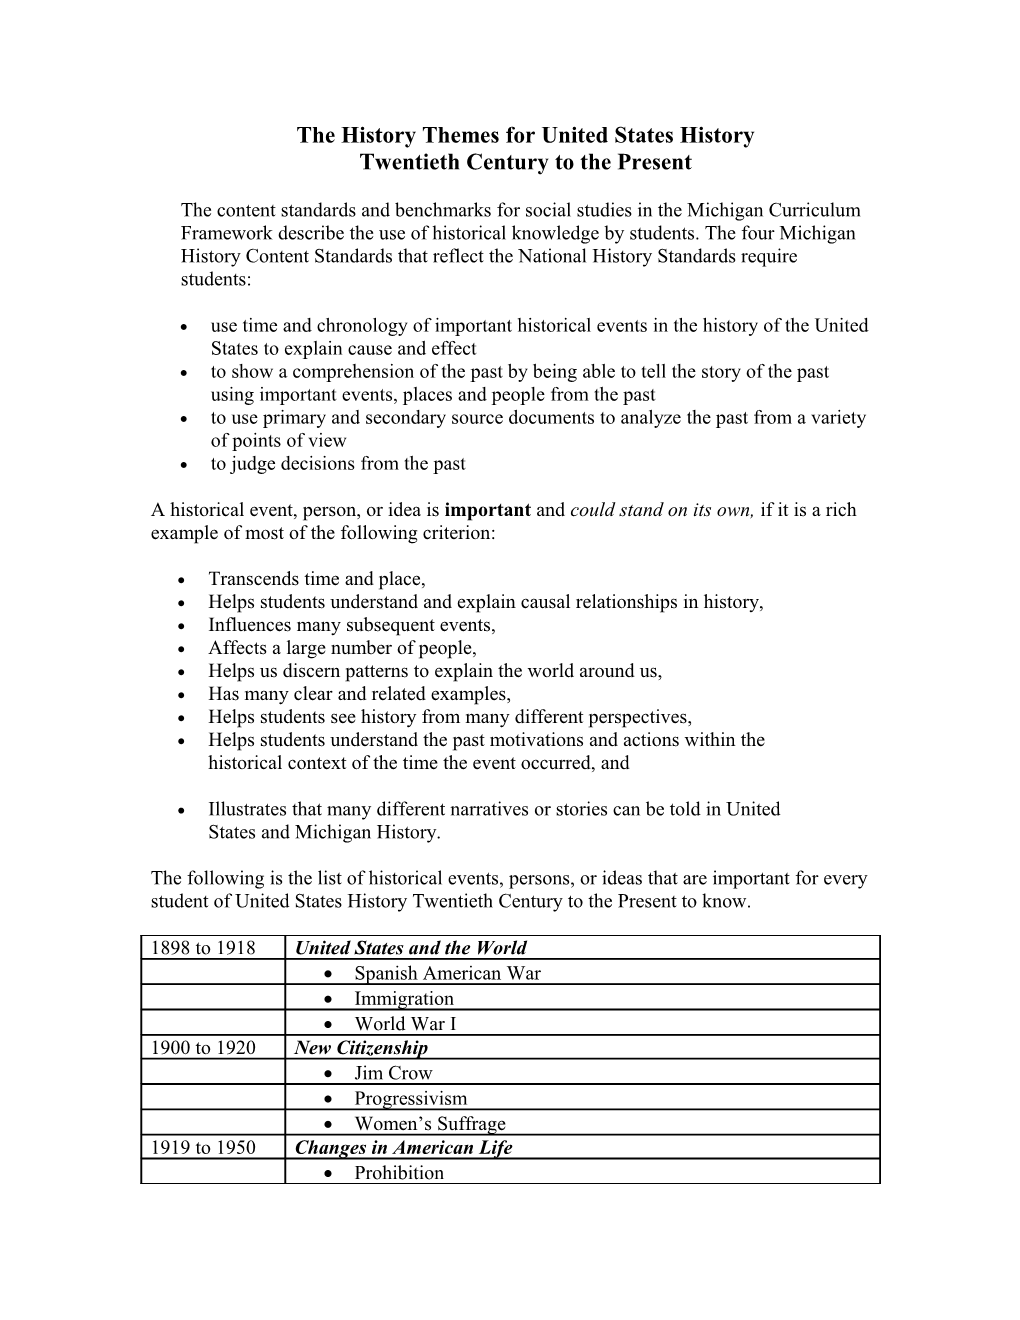 The History Themes for United States History Twentieth Century to the Present